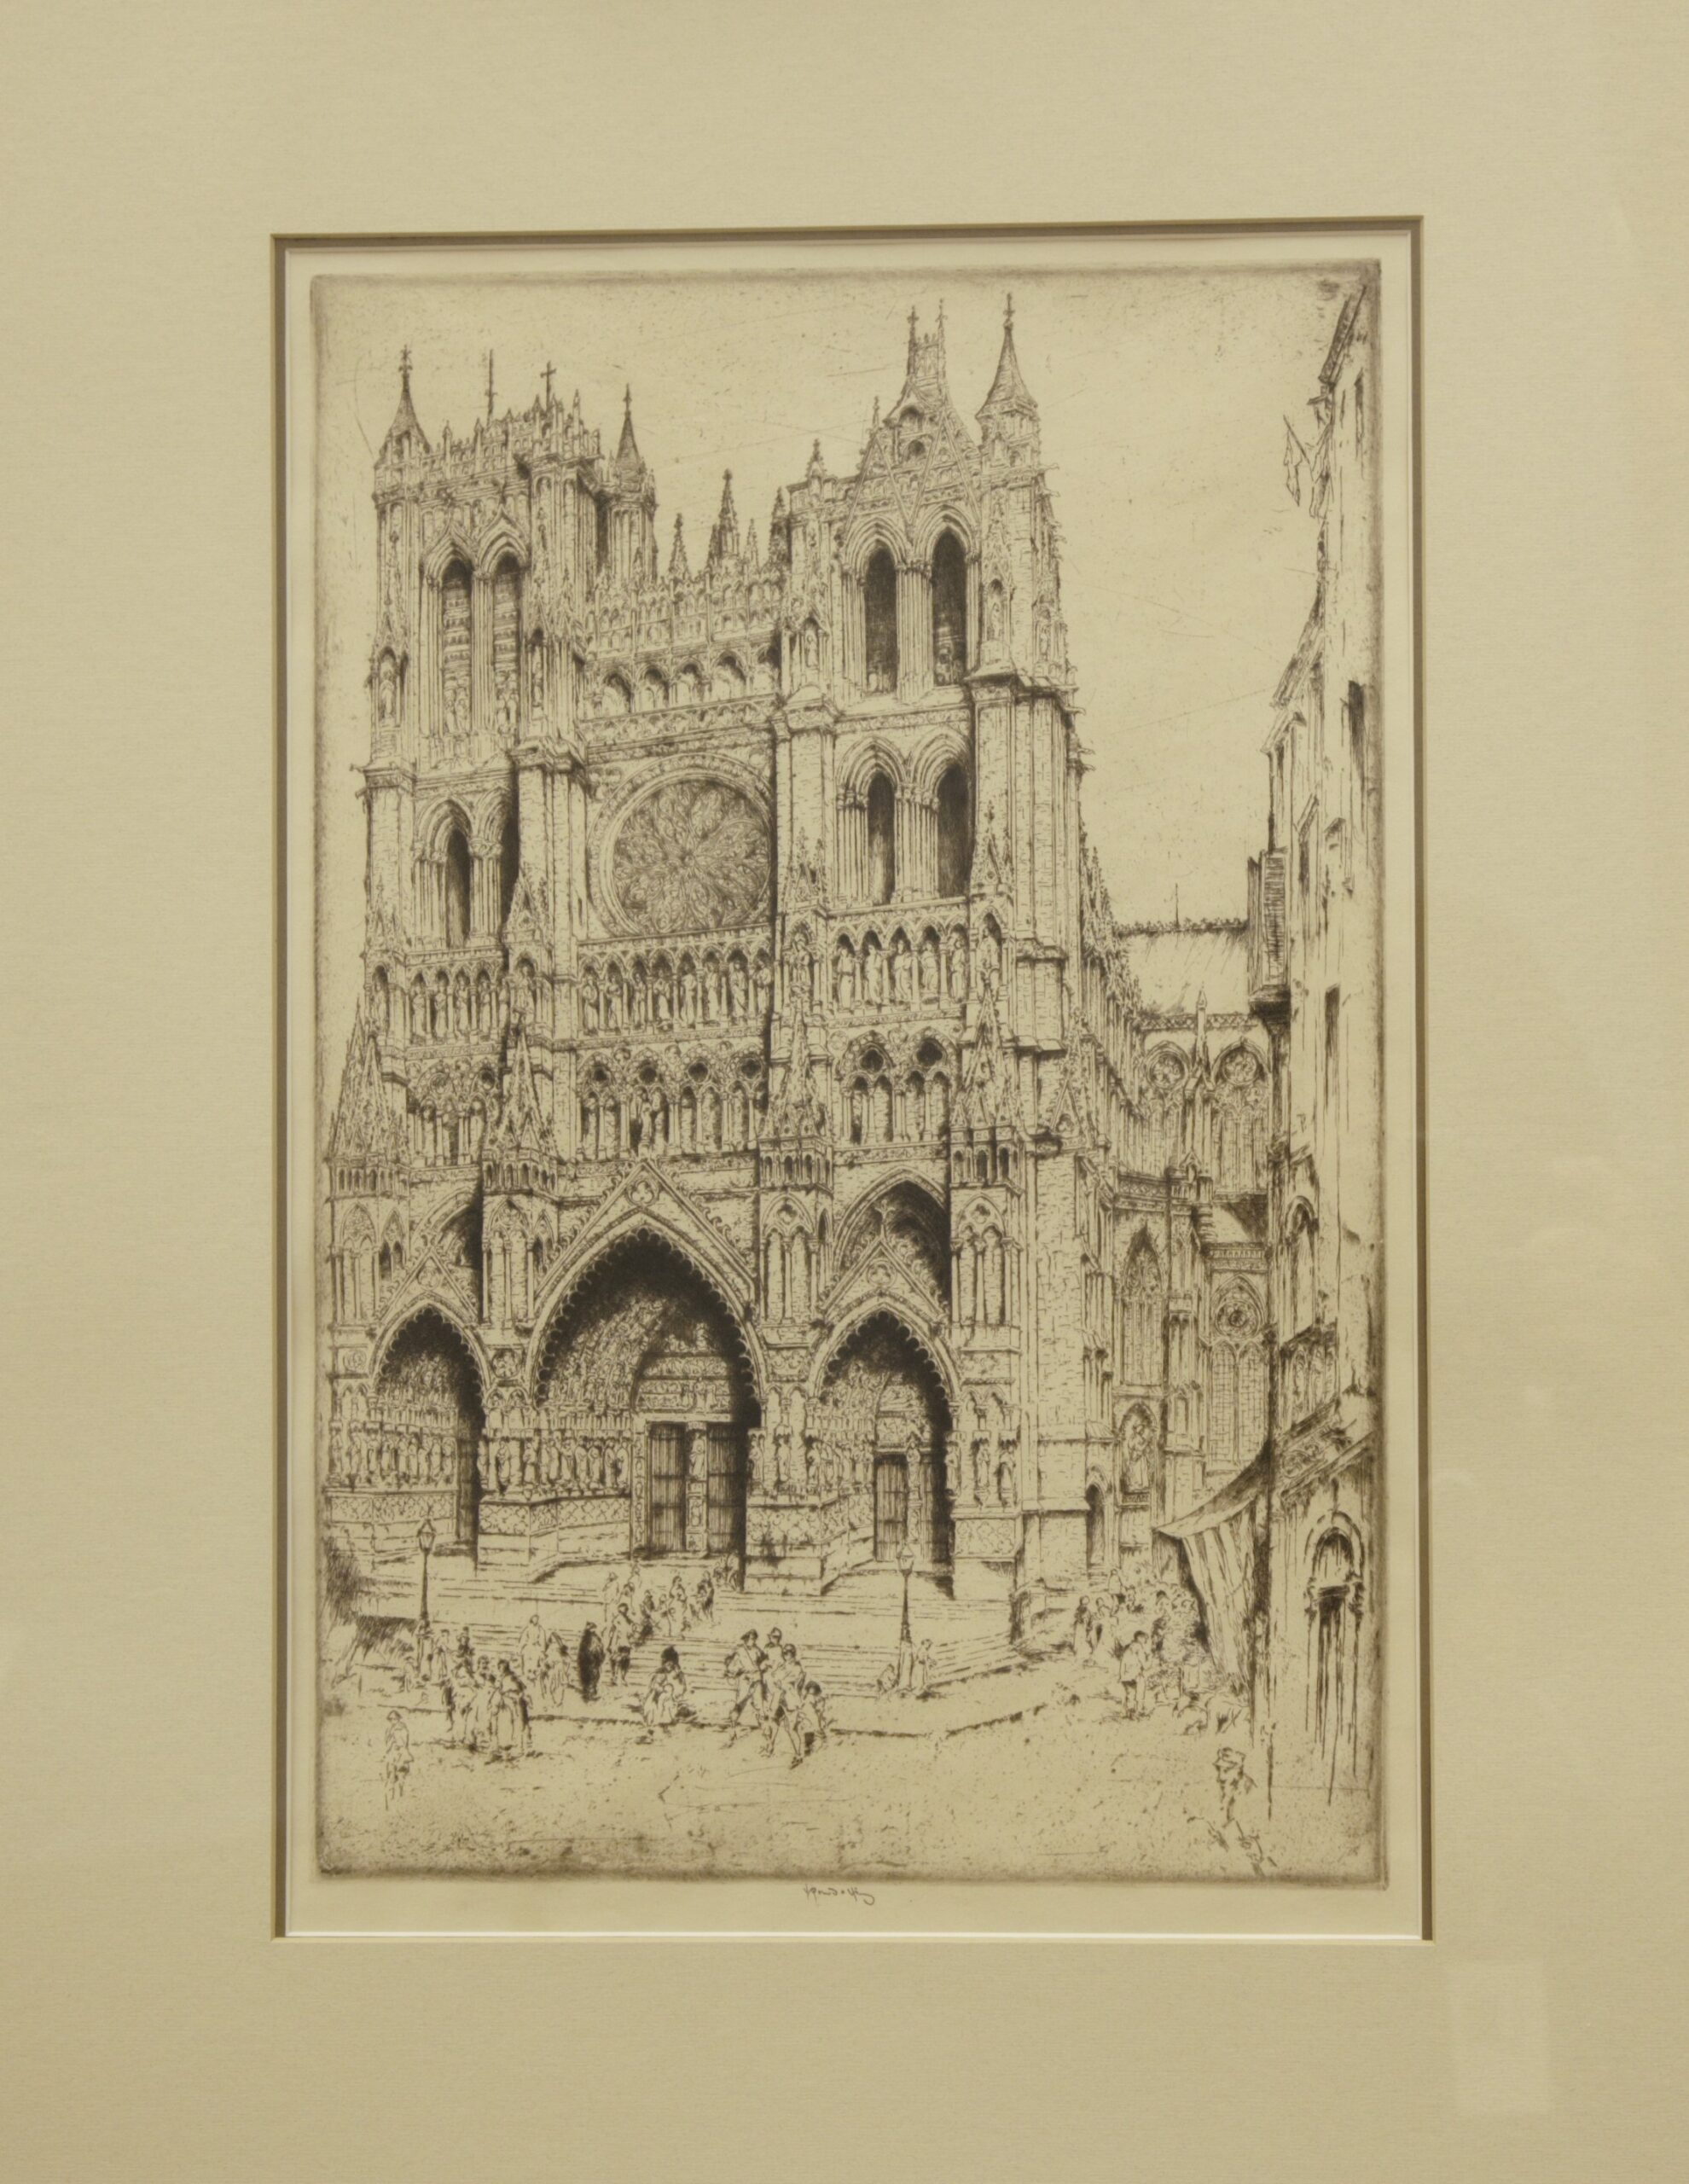 Amiens Cathedral Image